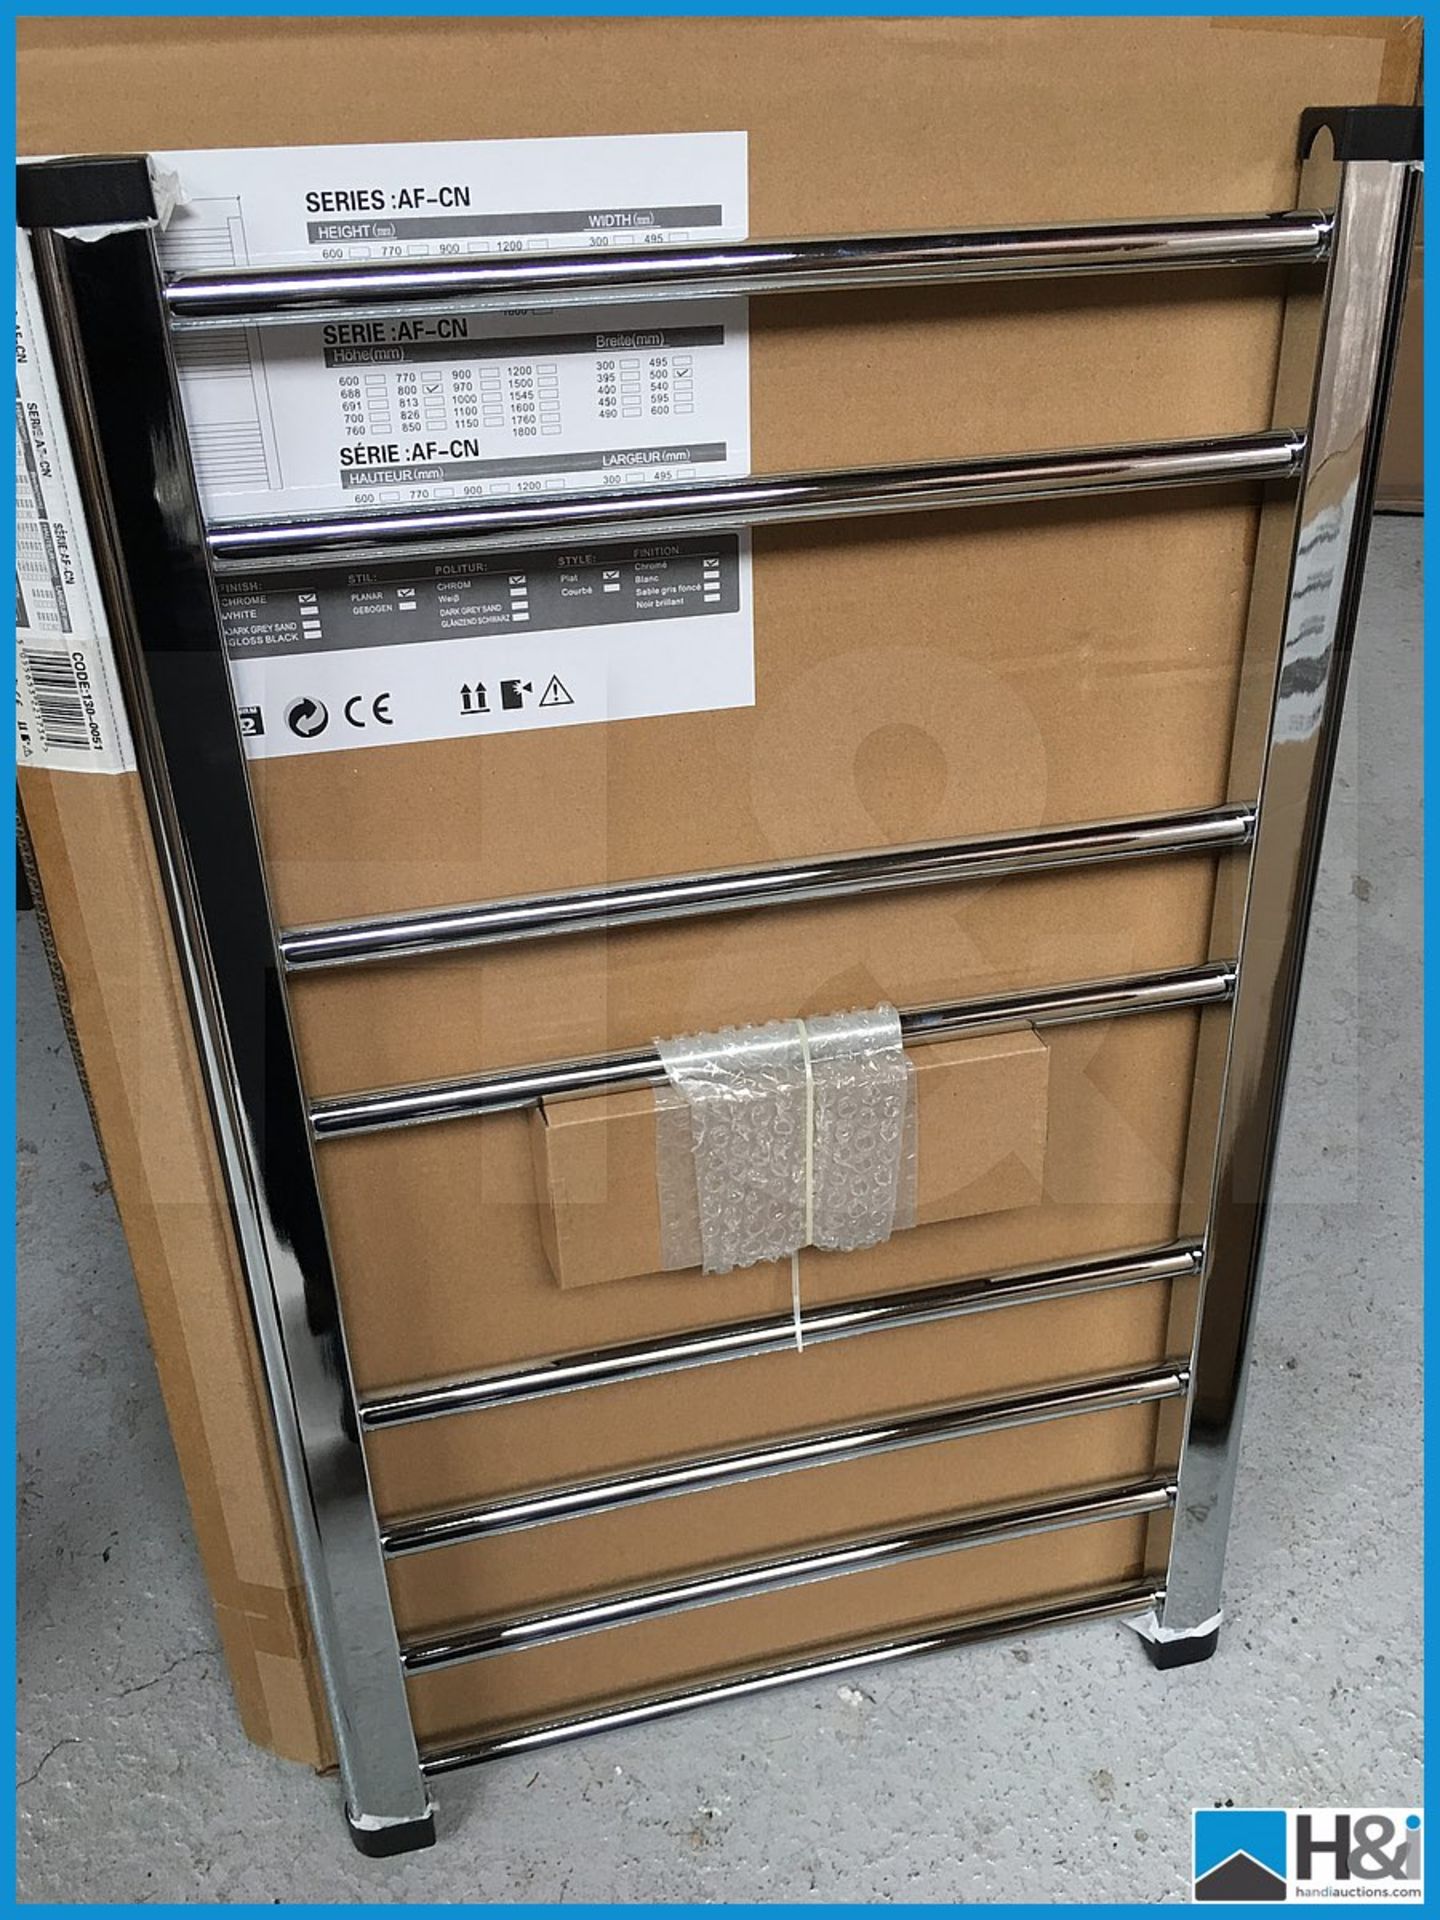 Designer polished chrome heated towel rail. 800x500. New and boxed. Suggested manufacturers